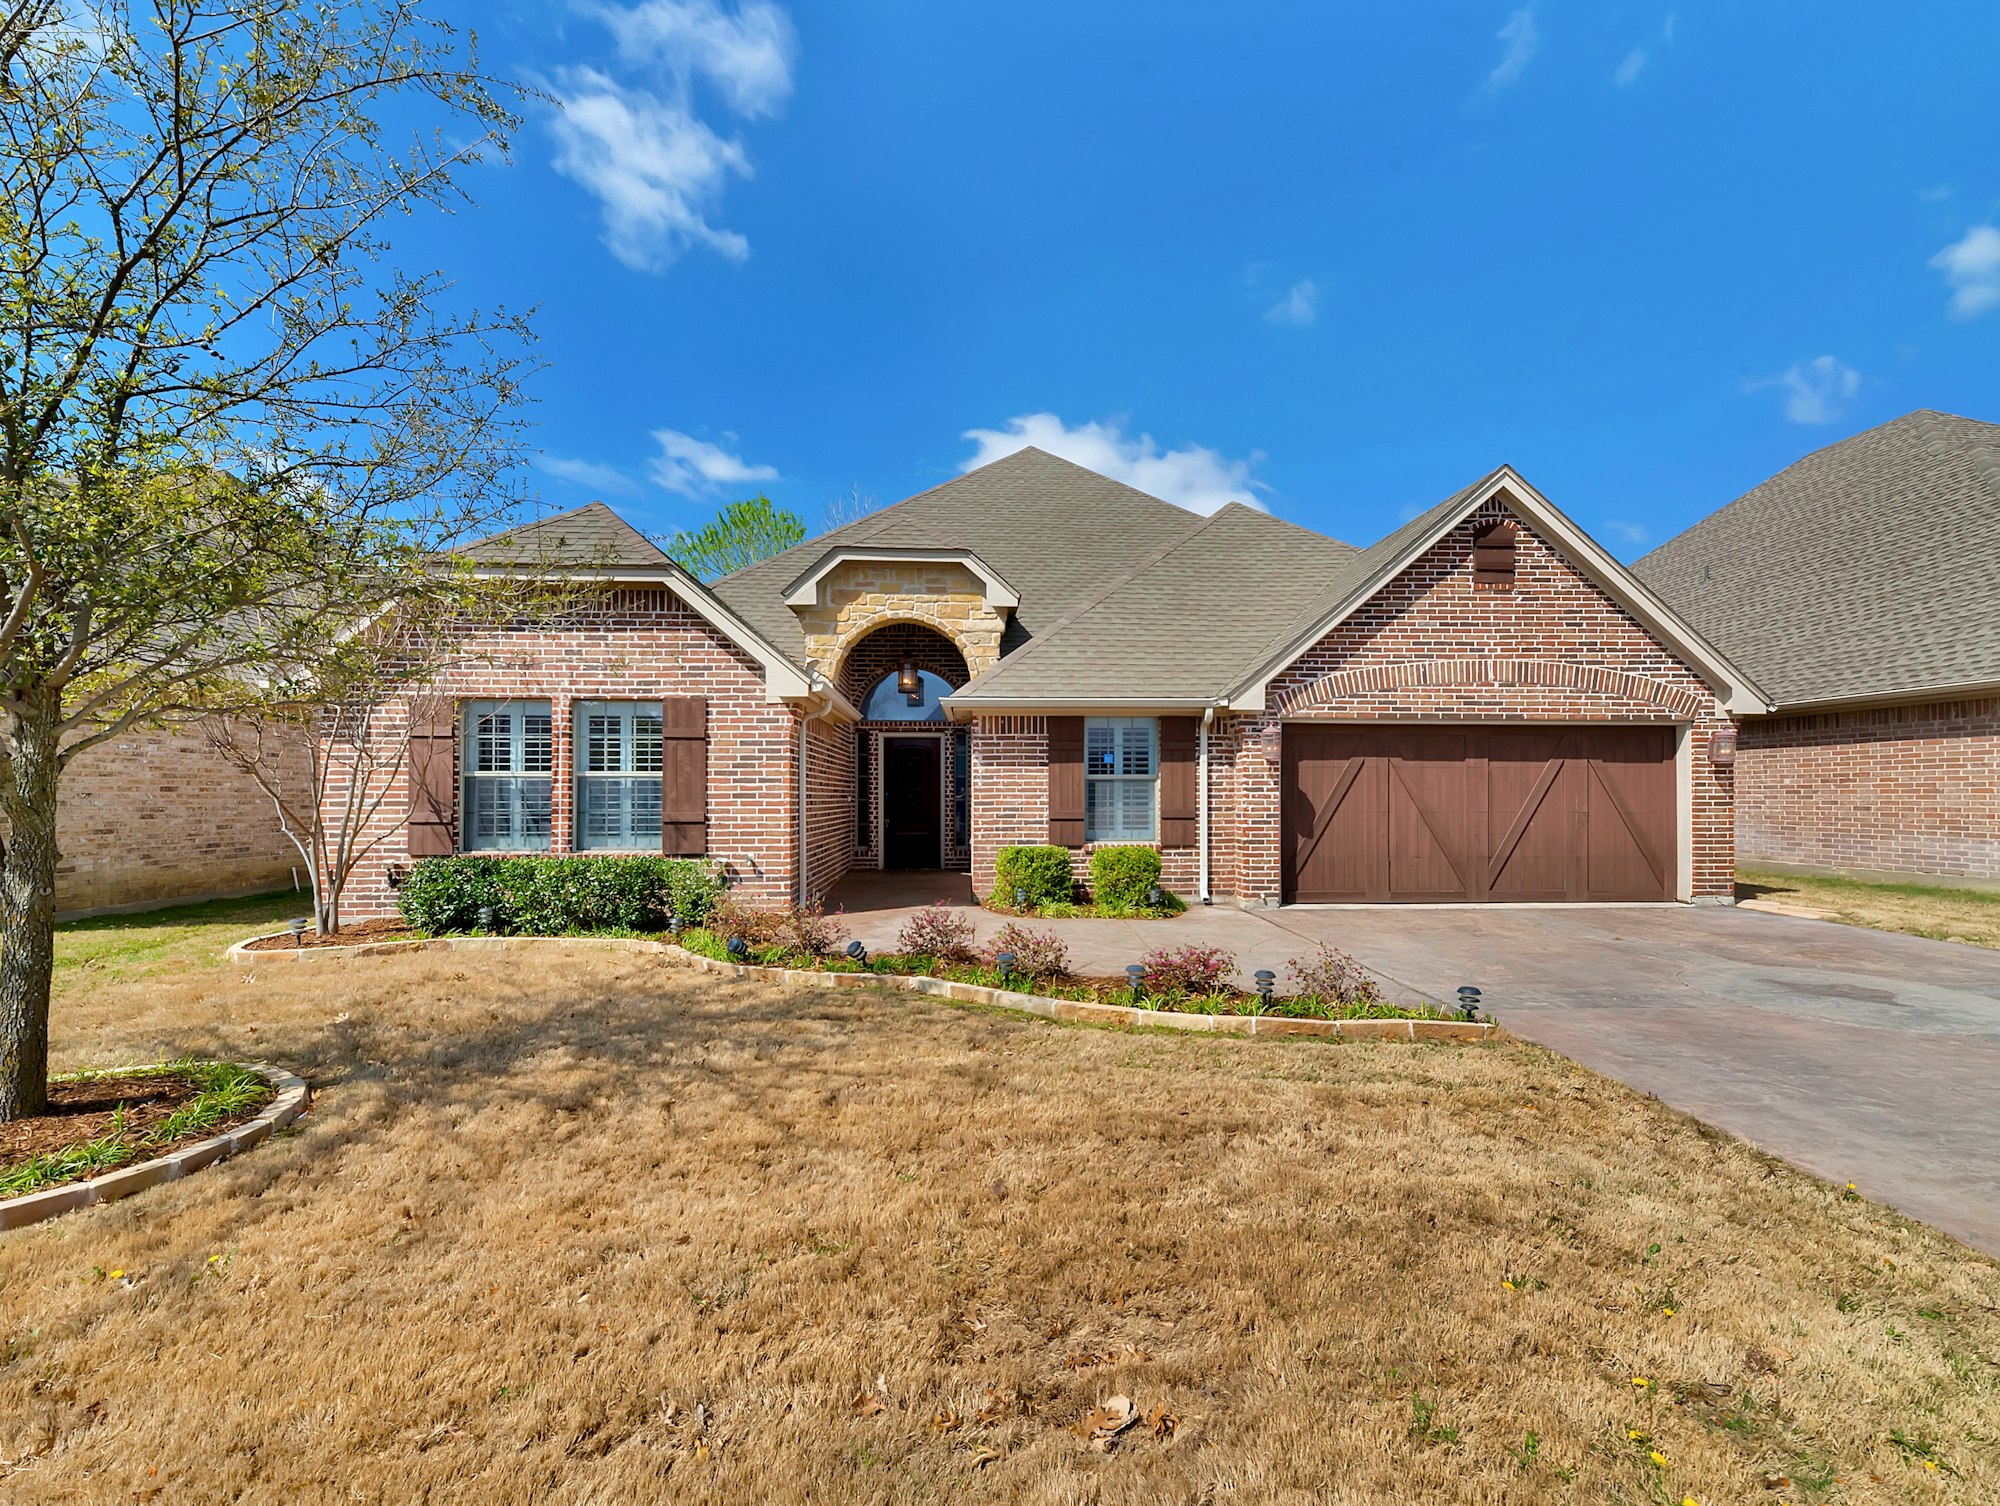 Photo 1 of 26 - 318 Spyglass Dr, Willow Park, TX 76008